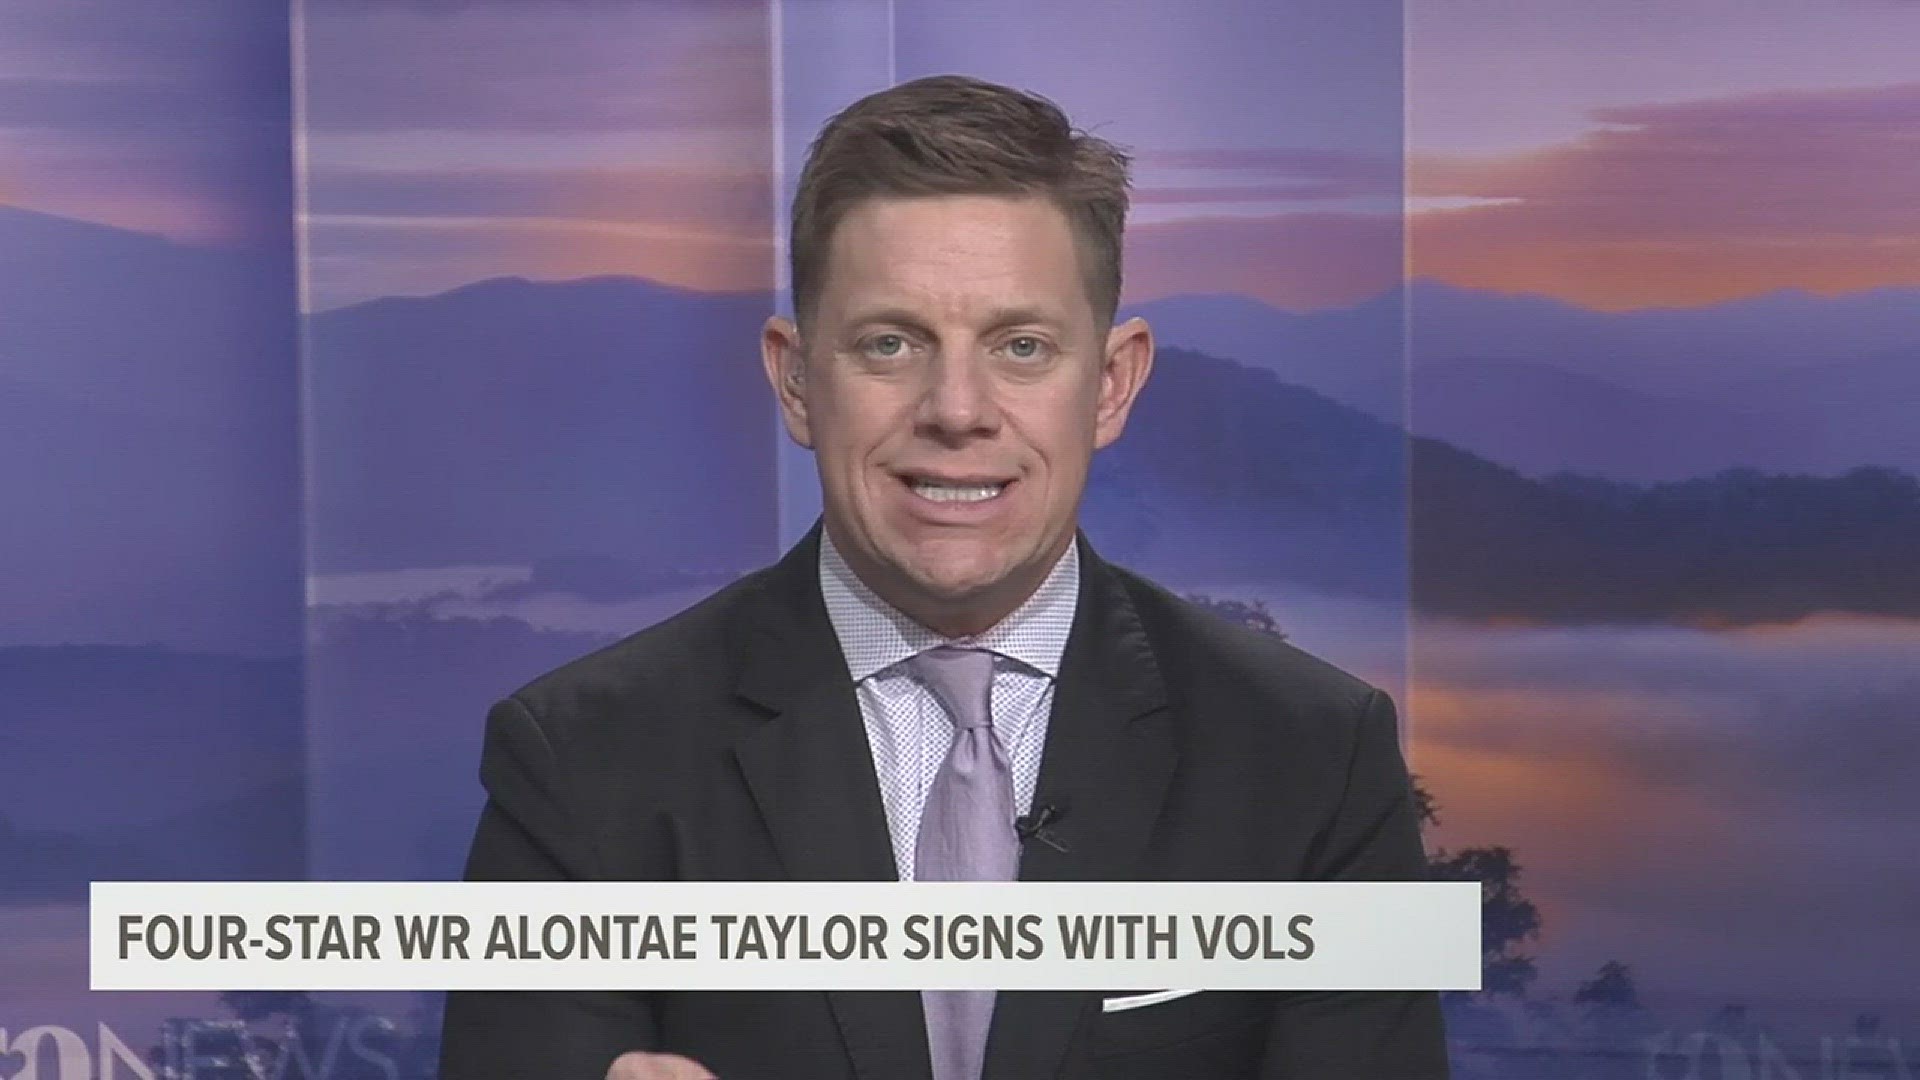 WBIR 10Sports Anchor Patrick Murray reports from Coffee County High School, where four-star receiver Alontae Taylor signed his letter of intent with Tennessee. He dedicated the day to his grandmother, who died in 2009.